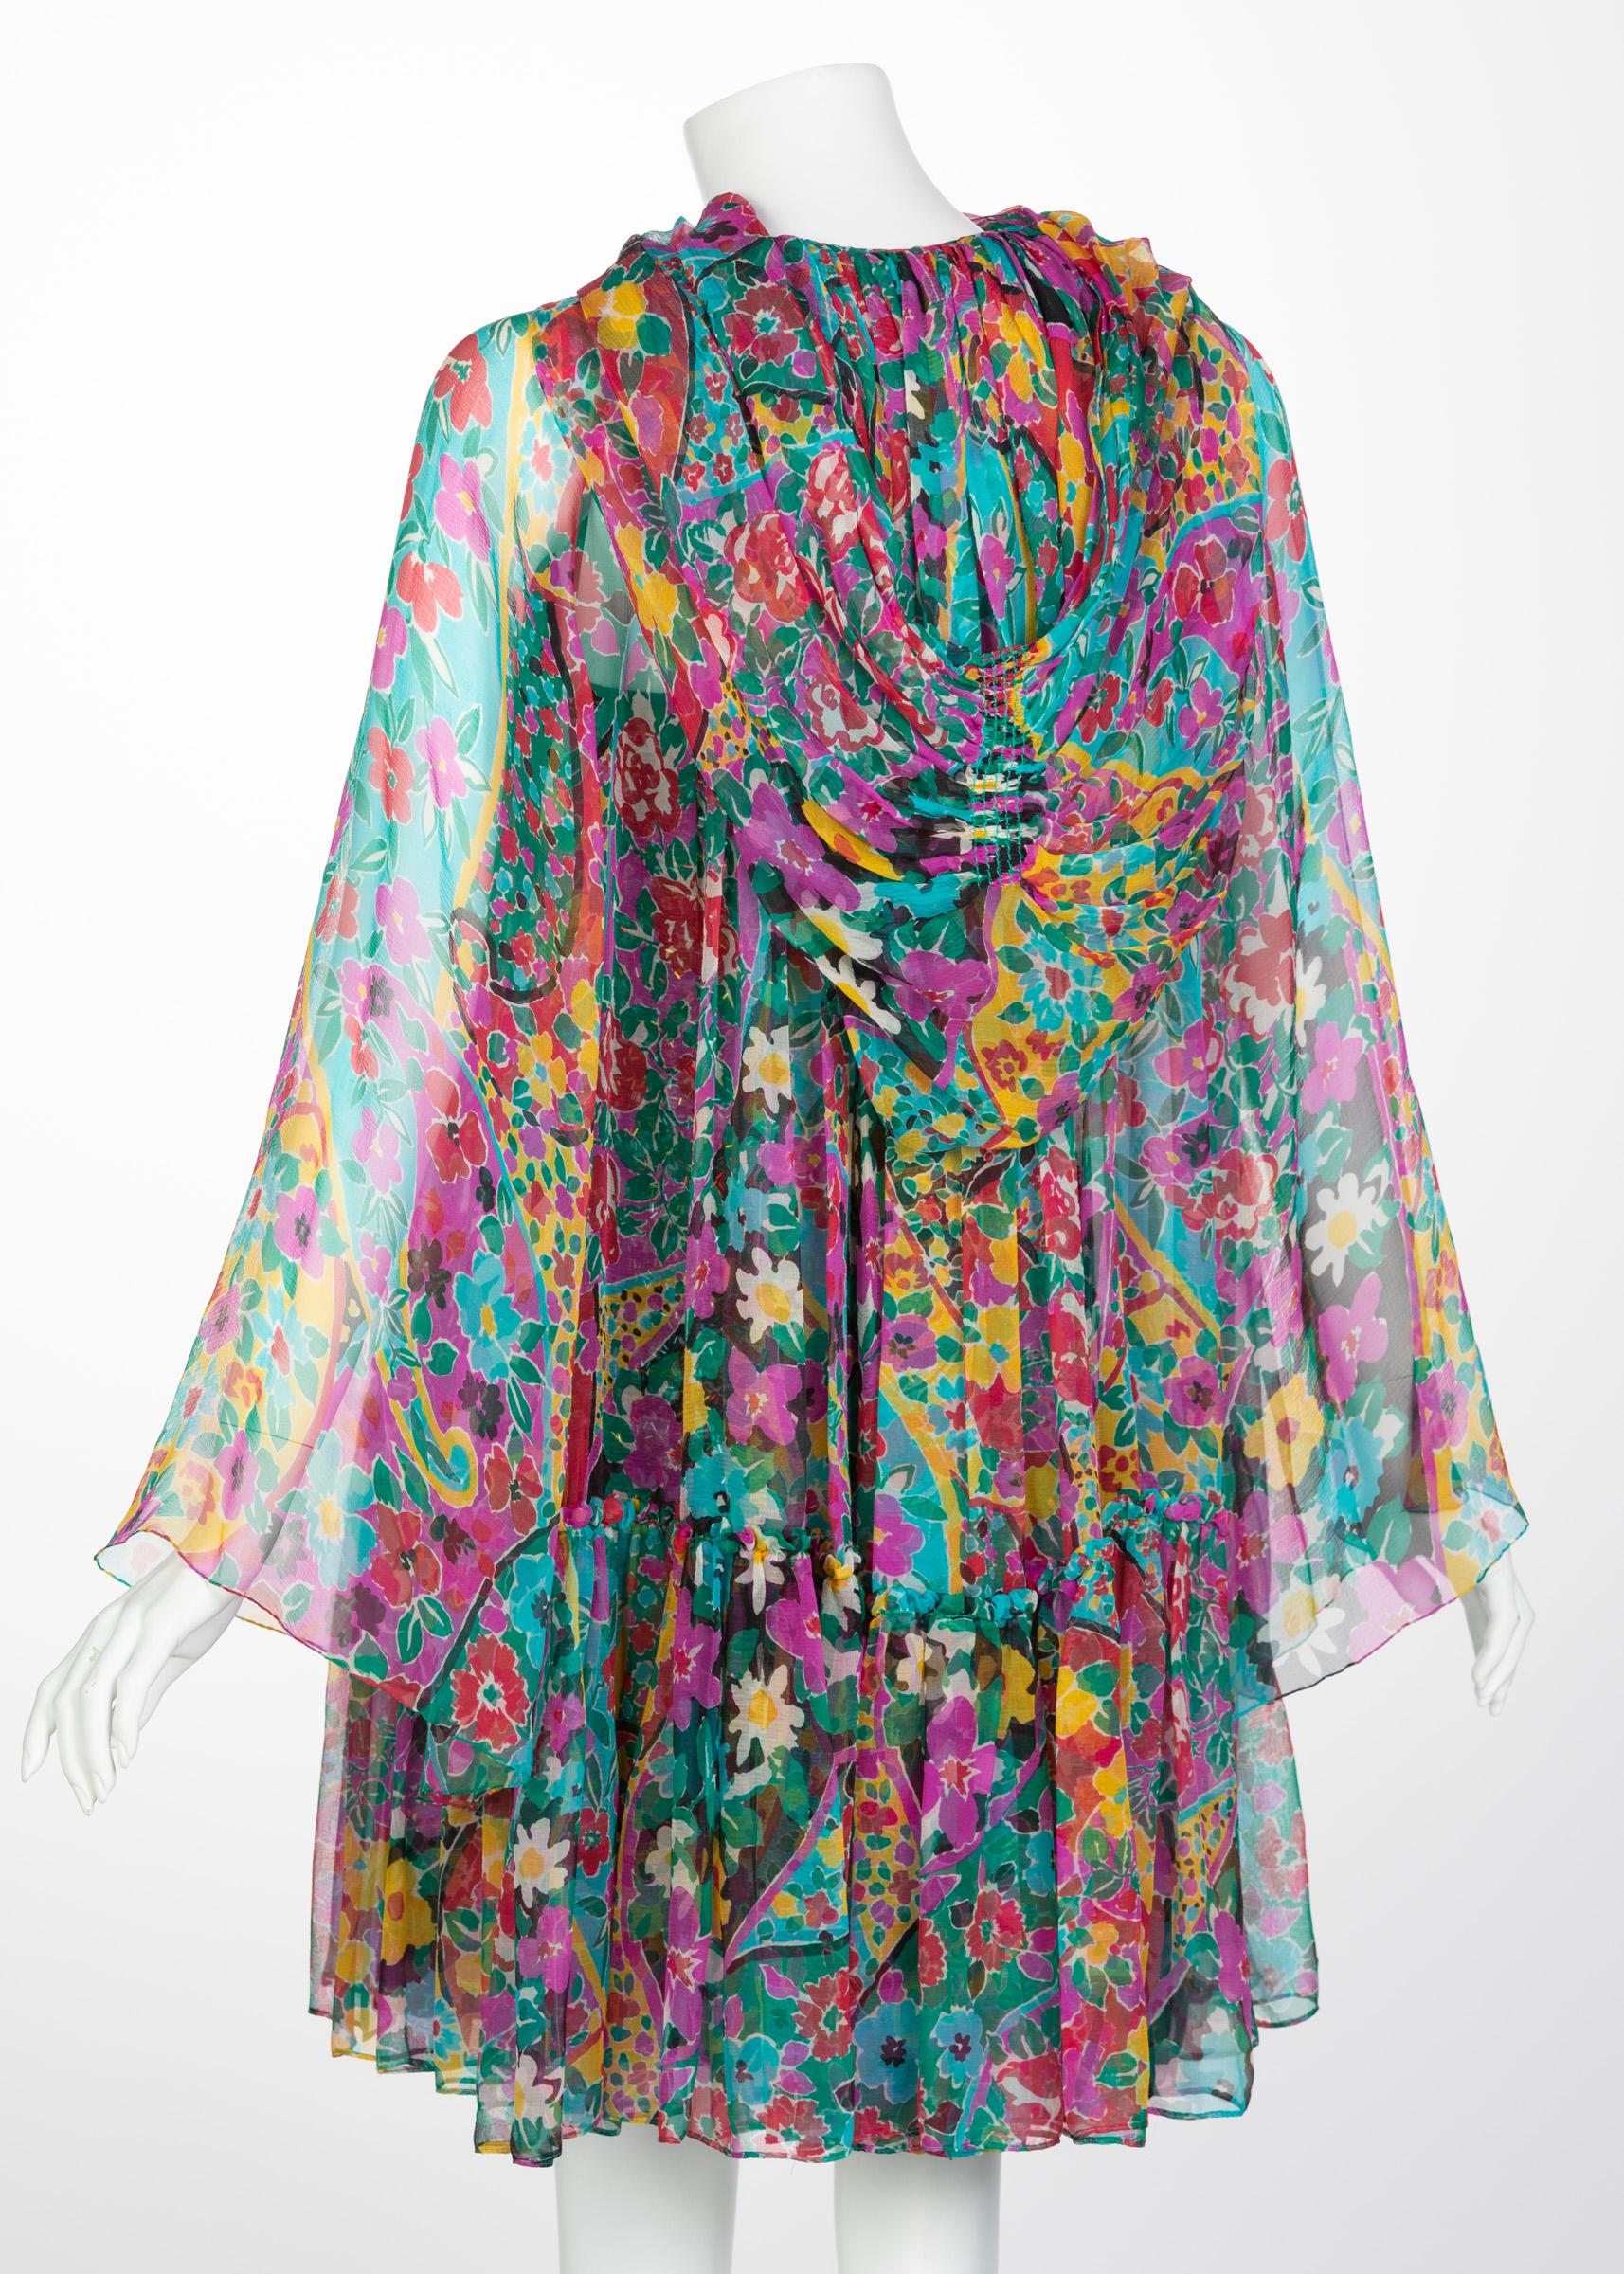 Women's James Galanos Couture Beaded Floral Silk Mini Dress with Hooded Opera Coat, 1970